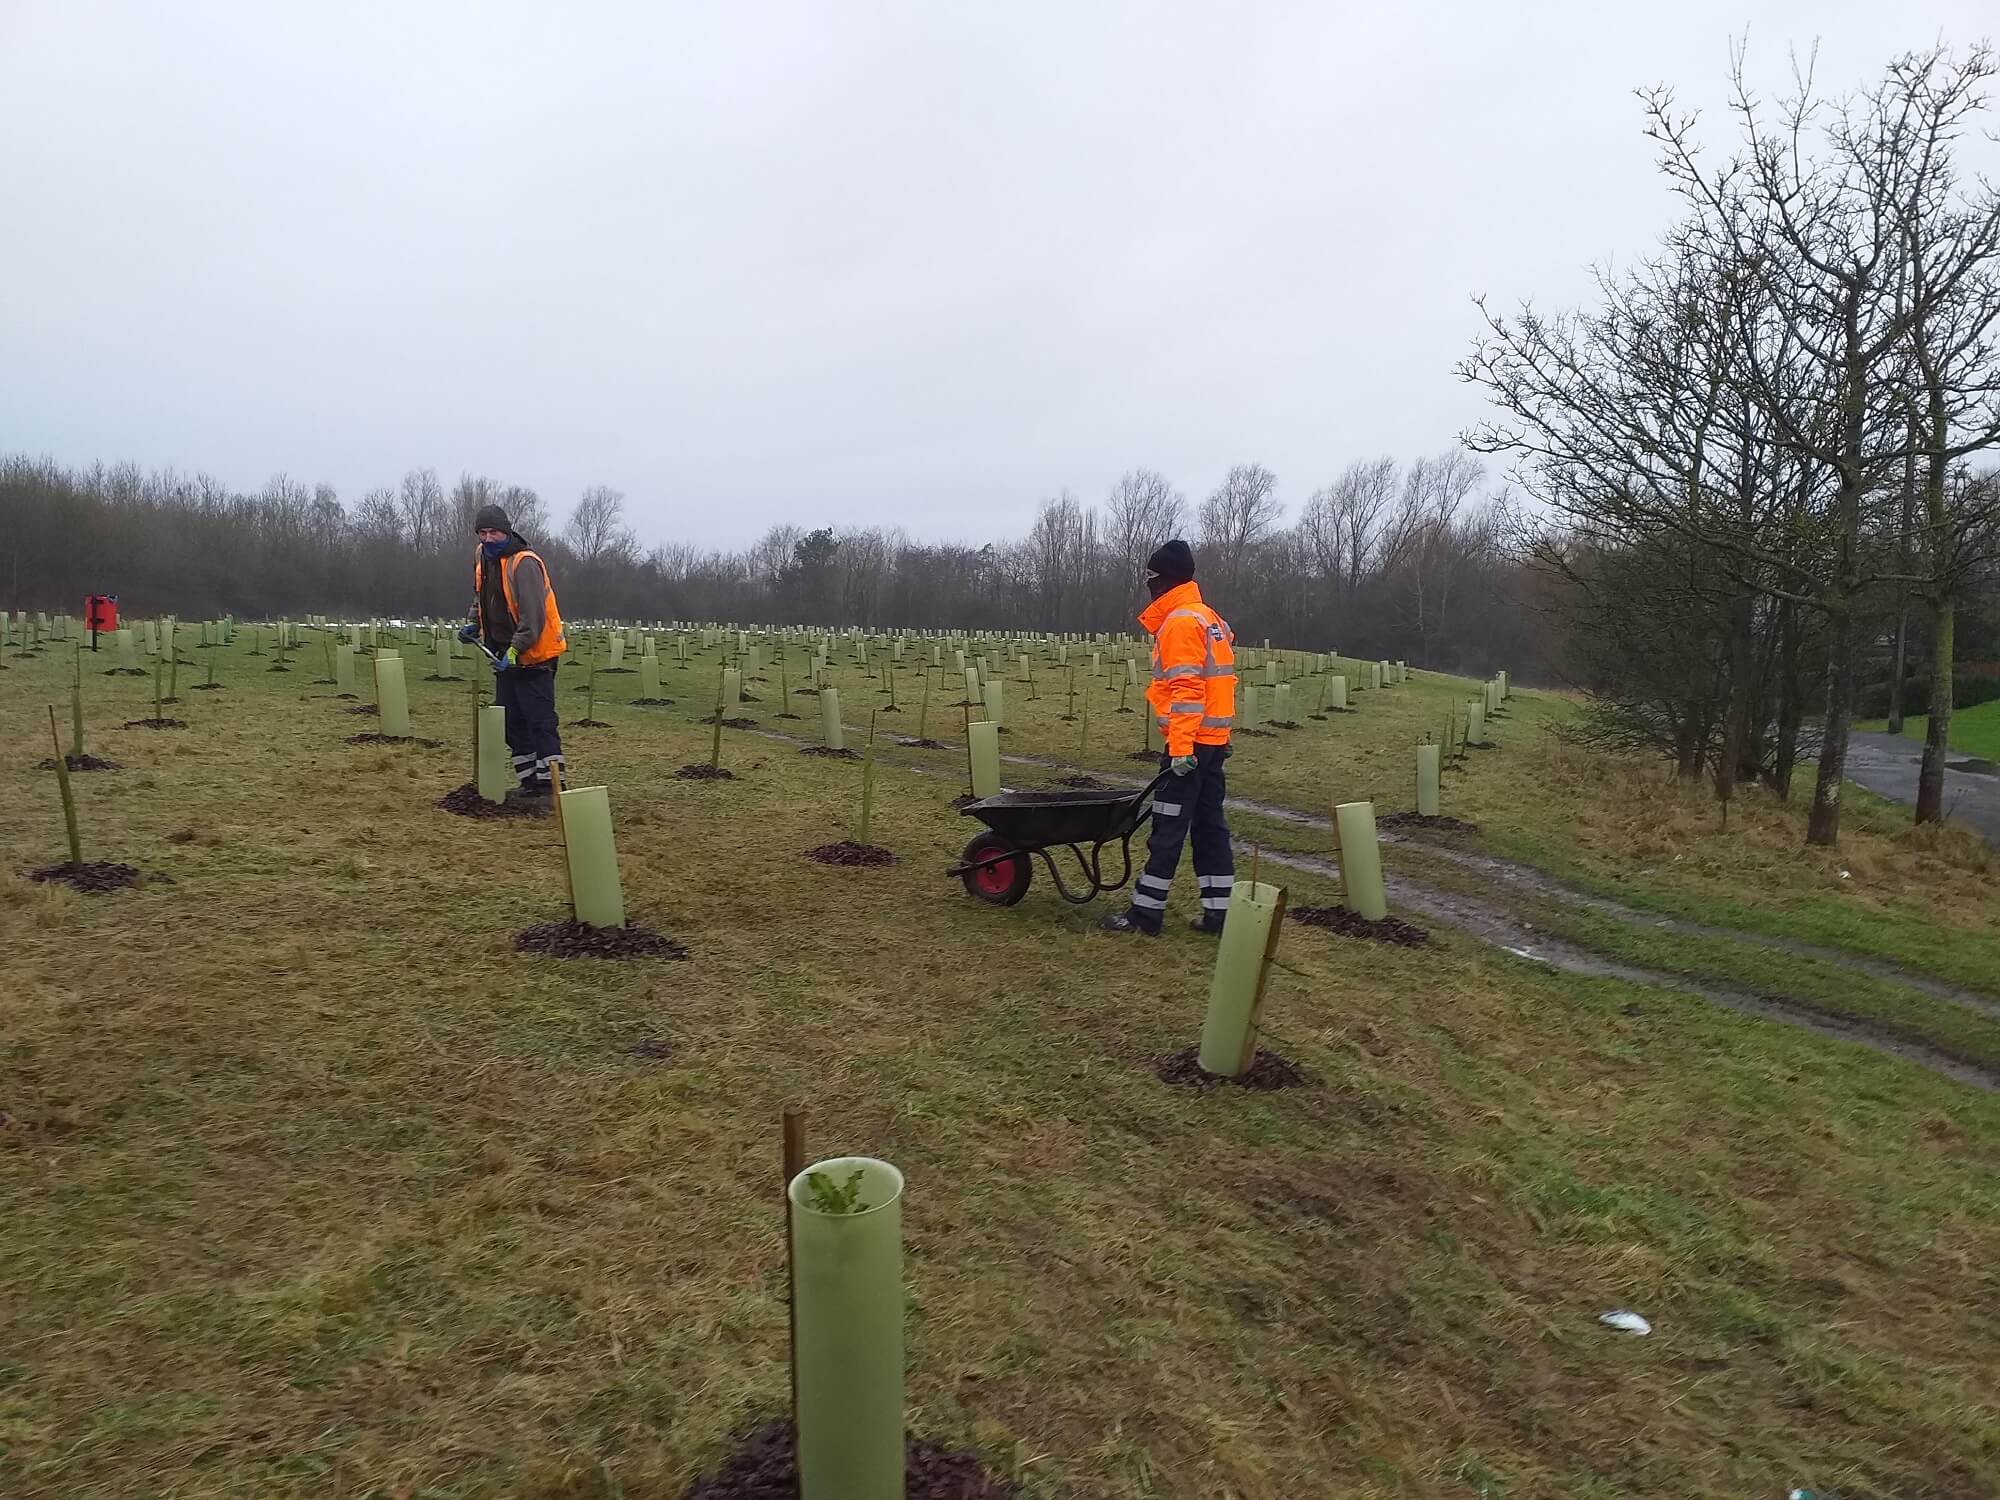 Photo contains 2 council workers planting trees in an open space